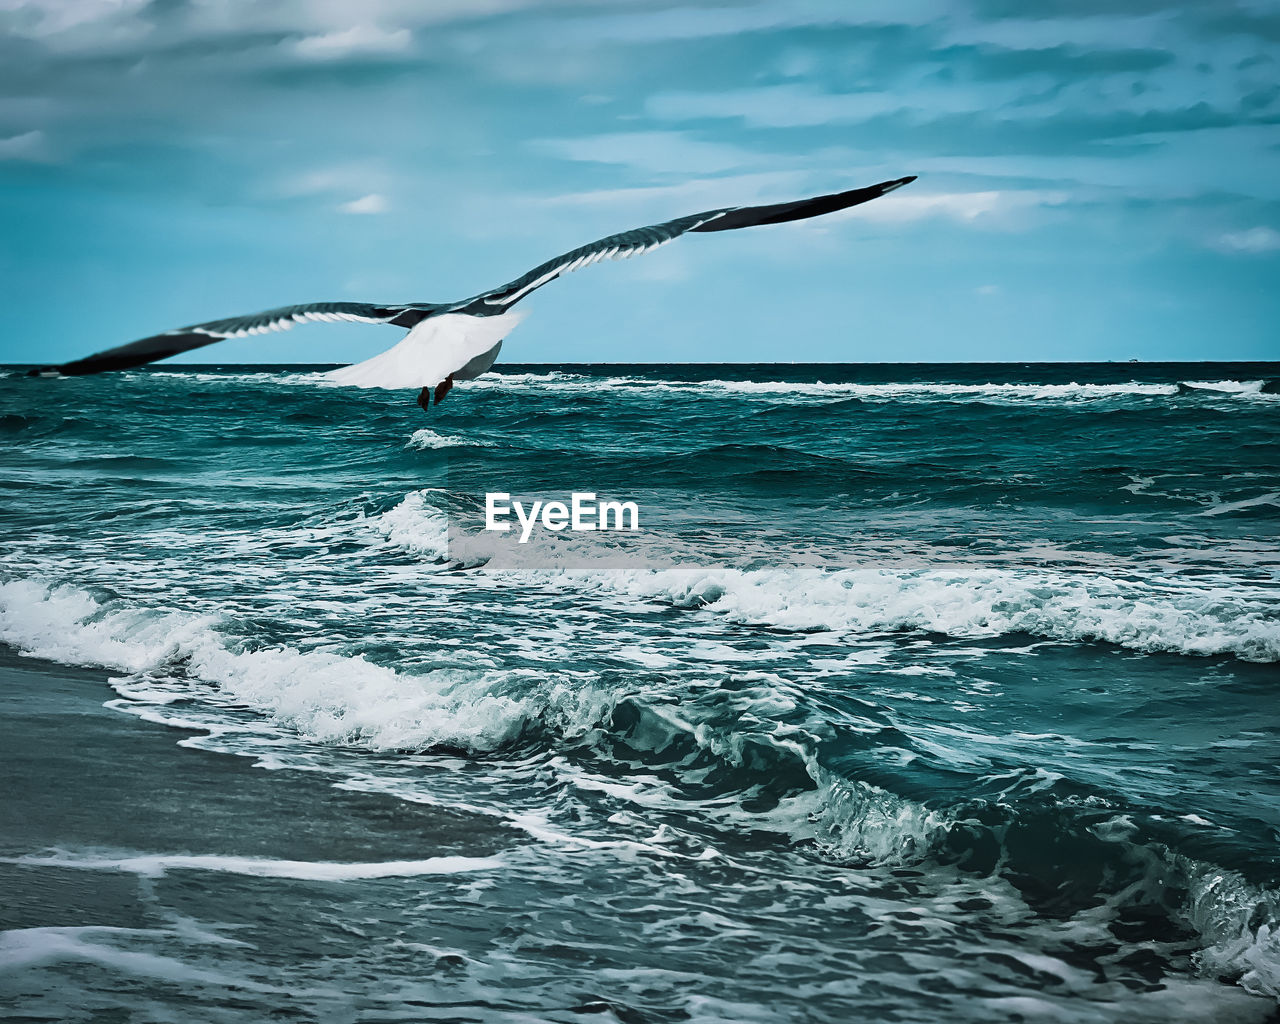 VIEW OF BIRDS IN SEA